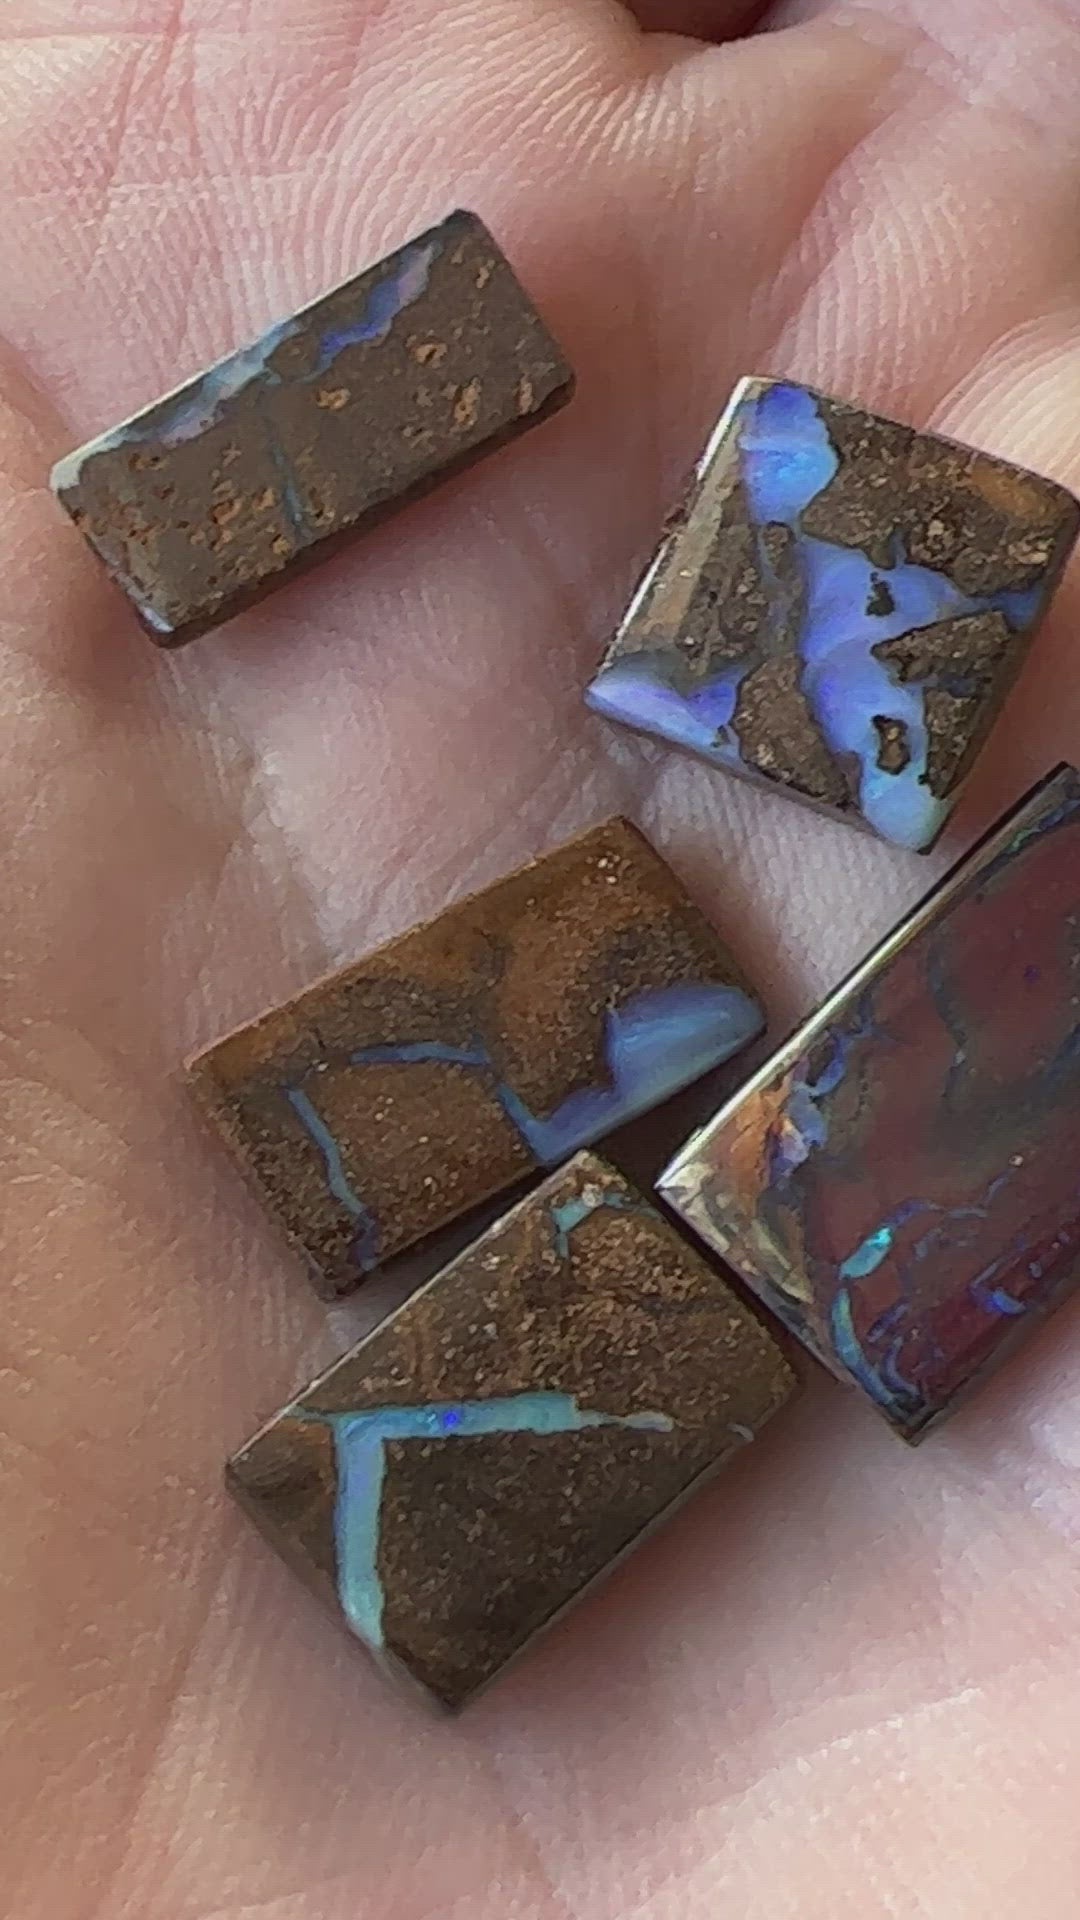 Five square cut boulder opals from Winton. Nice polish.